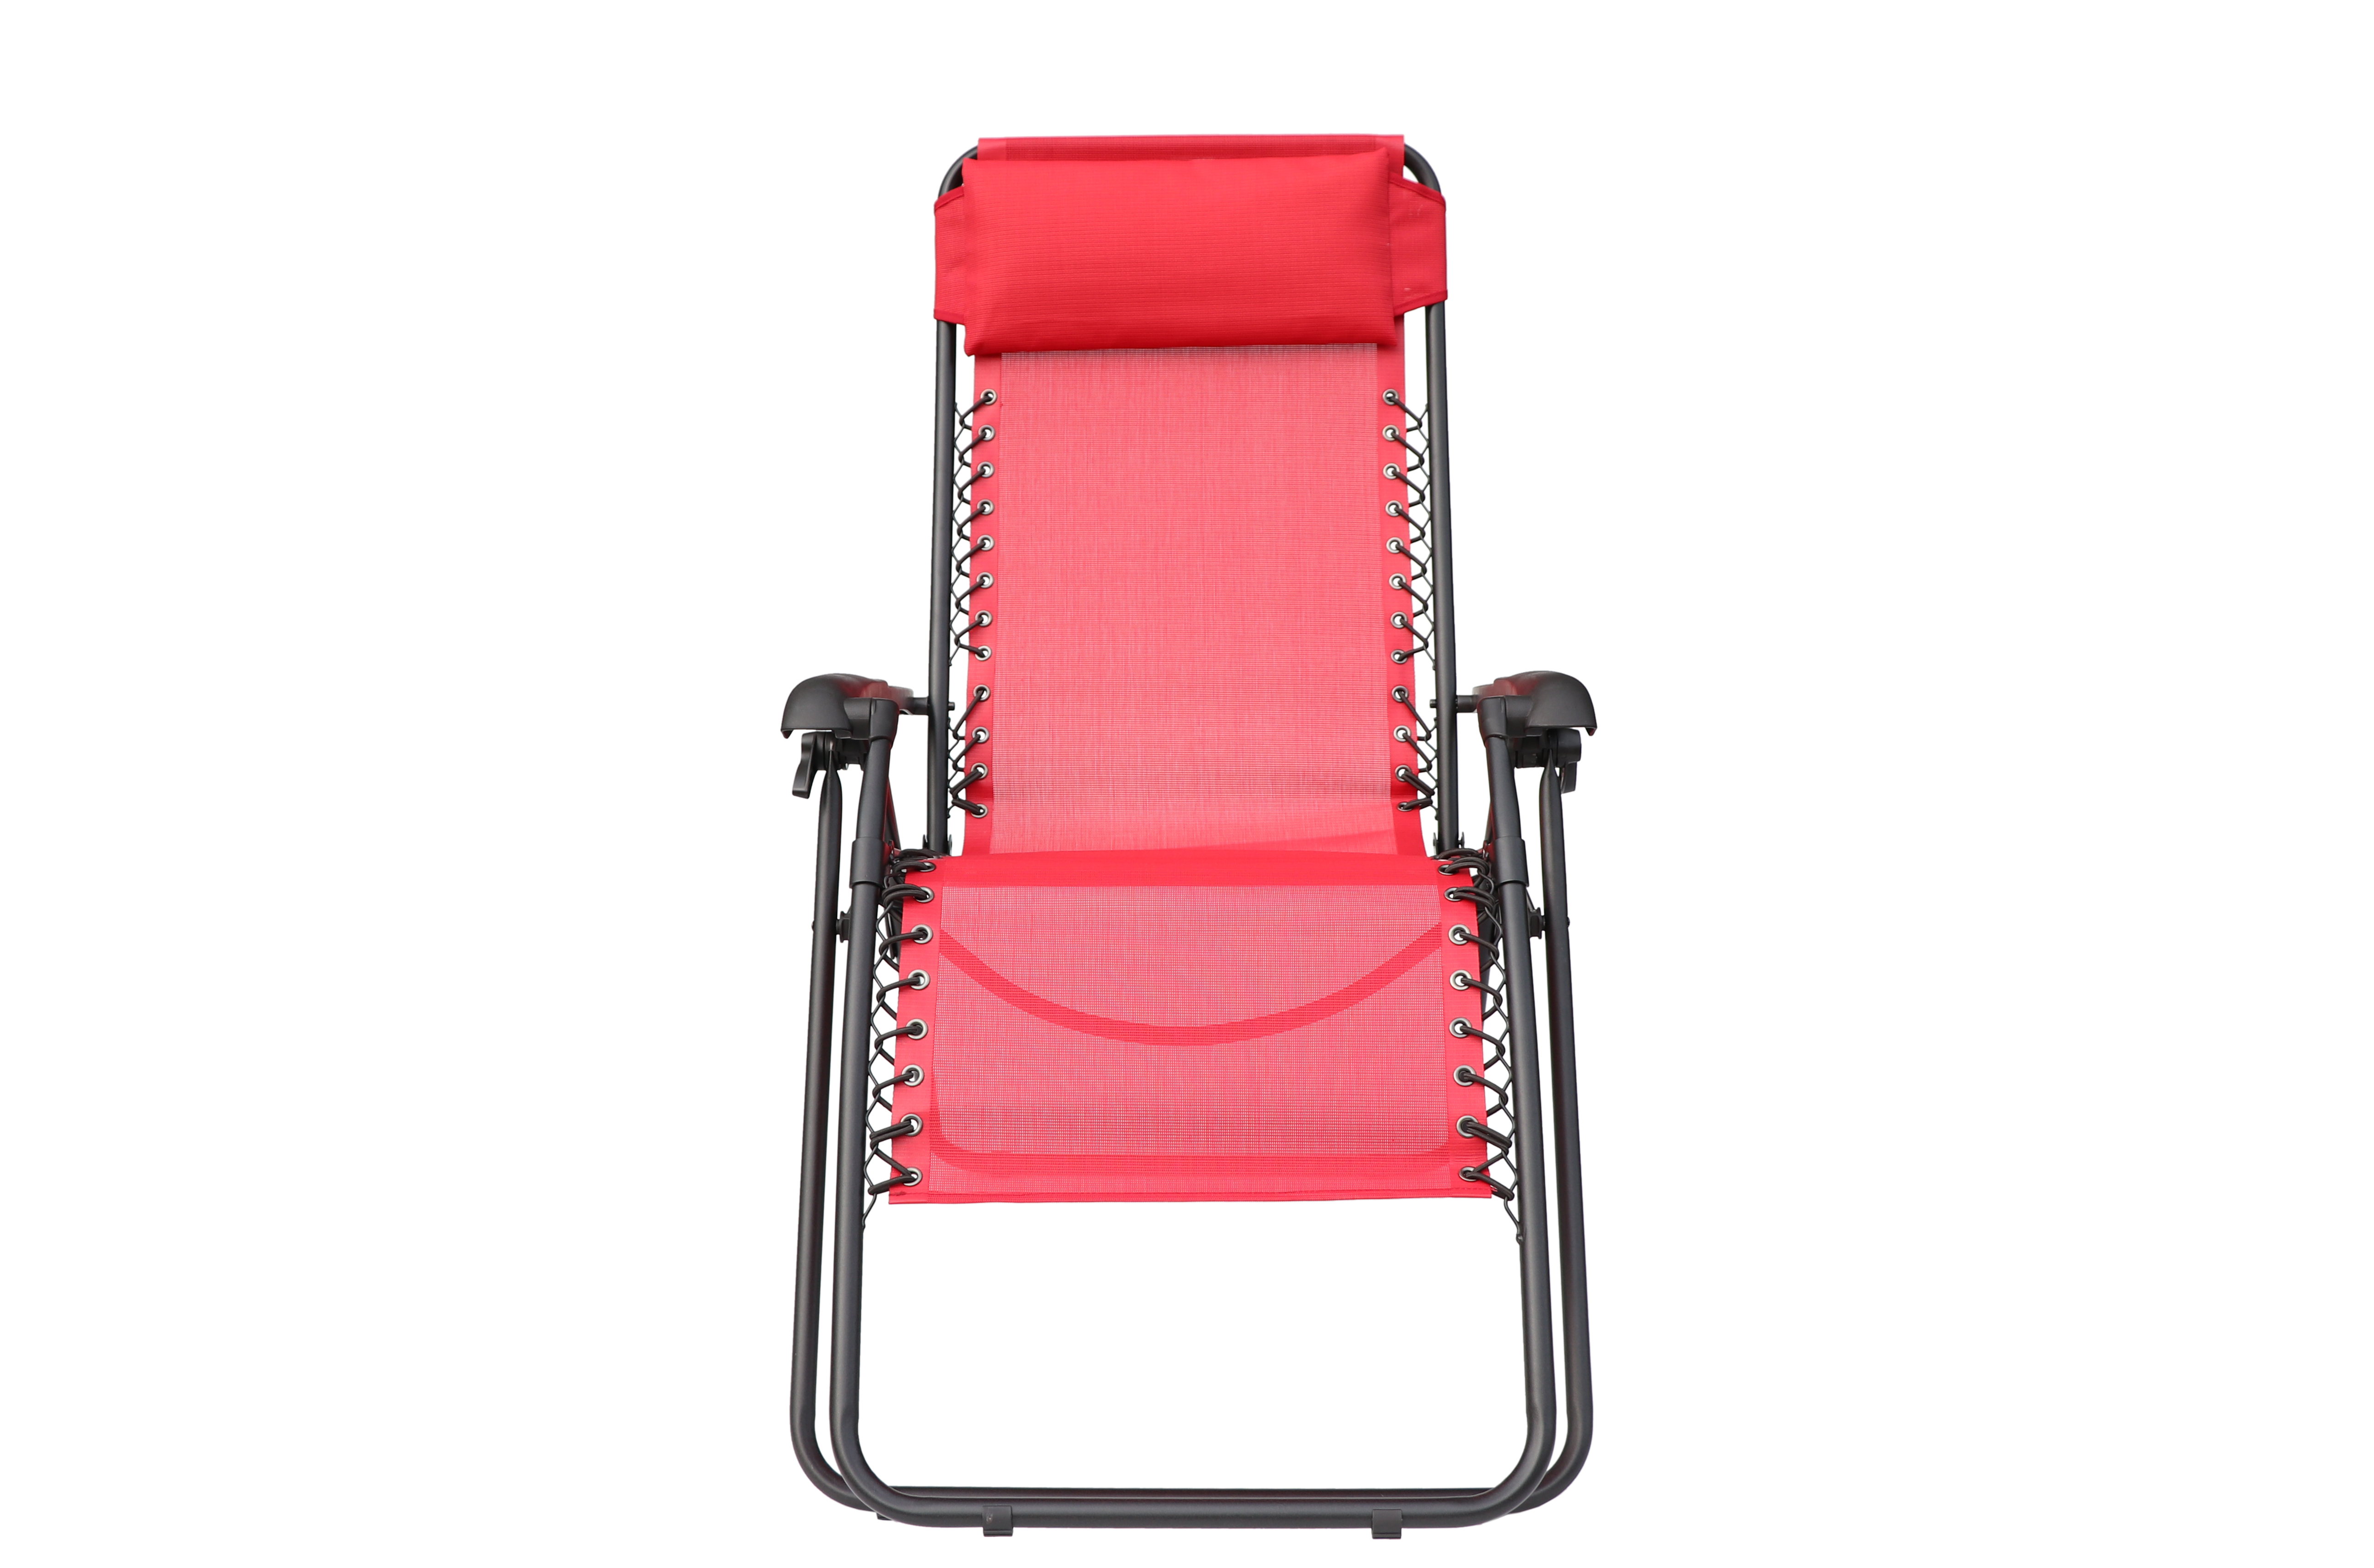 Mainstays Zero Gravity Bungee Lounge Chair - Red - image 2 of 8